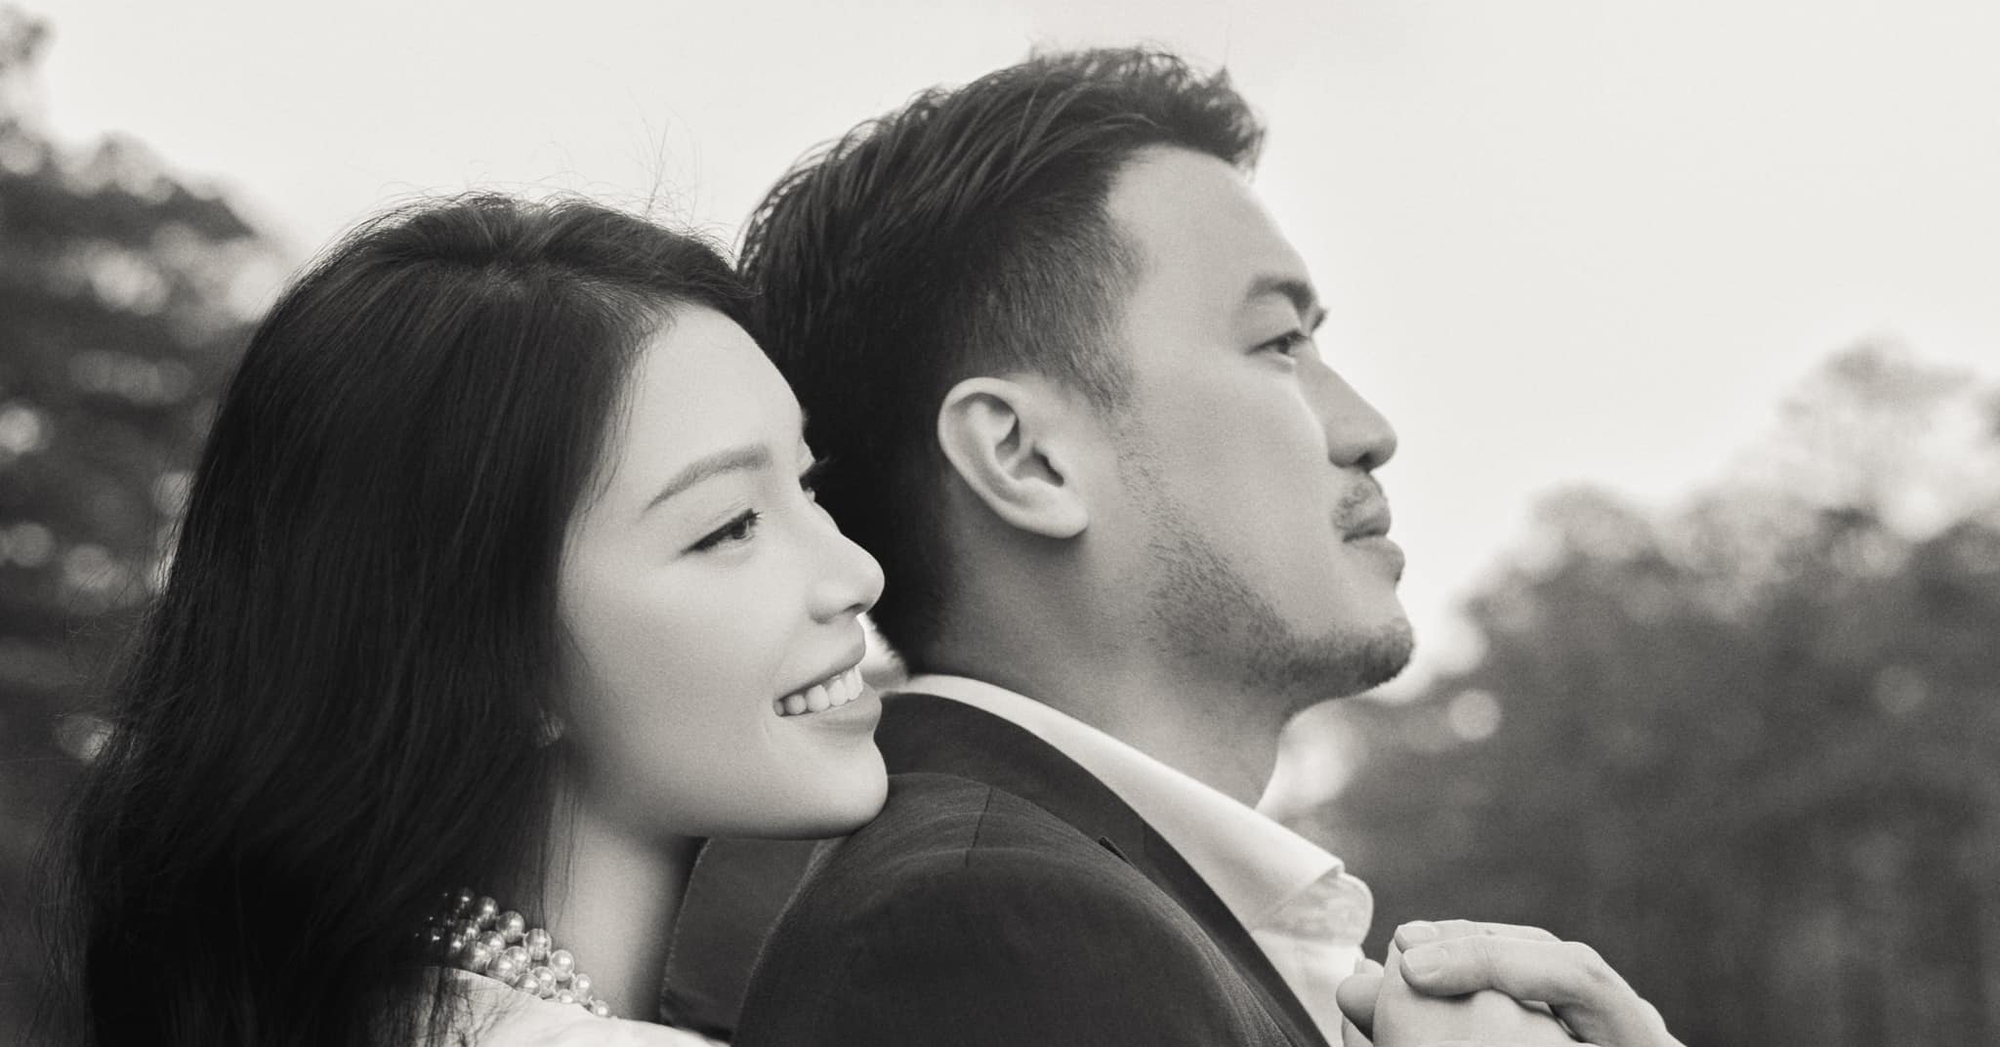 Young master Phillip Nguyen announced his marriage to student Pham Huong